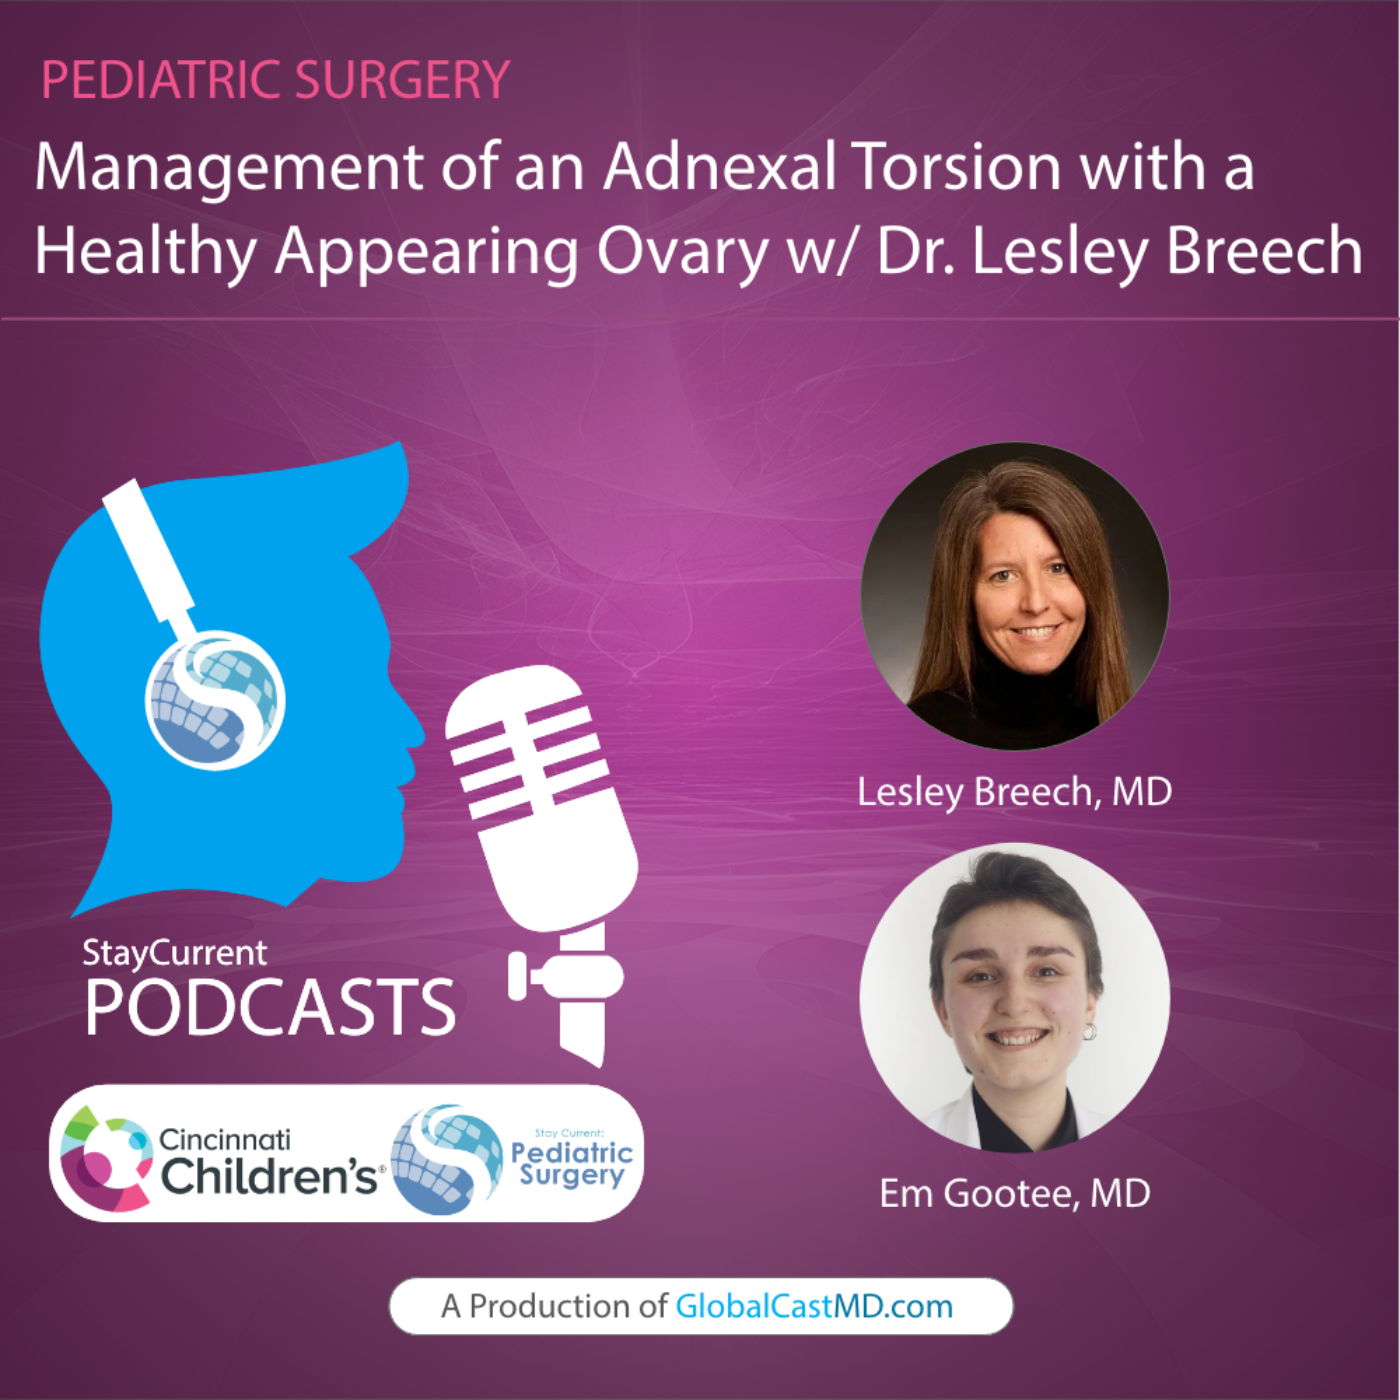 GYN #3 Management of an Adnexal Torsion with a Healthy Appearing Ovary with Dr. Lesley Breech